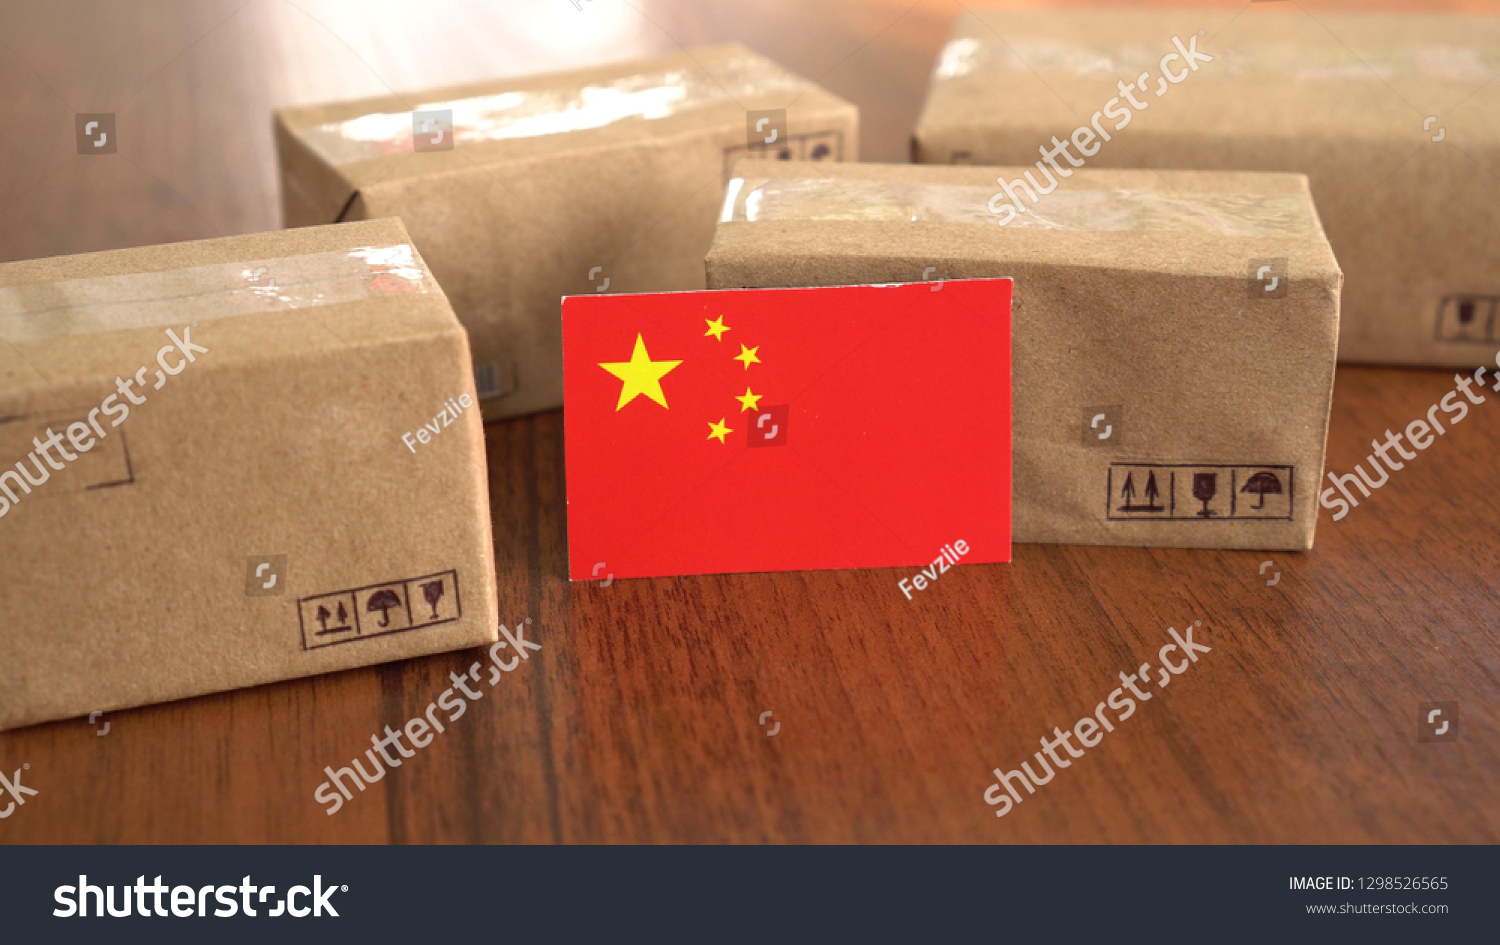 Package box with a flag of China. Online shopping. International E-commerce #1298526565